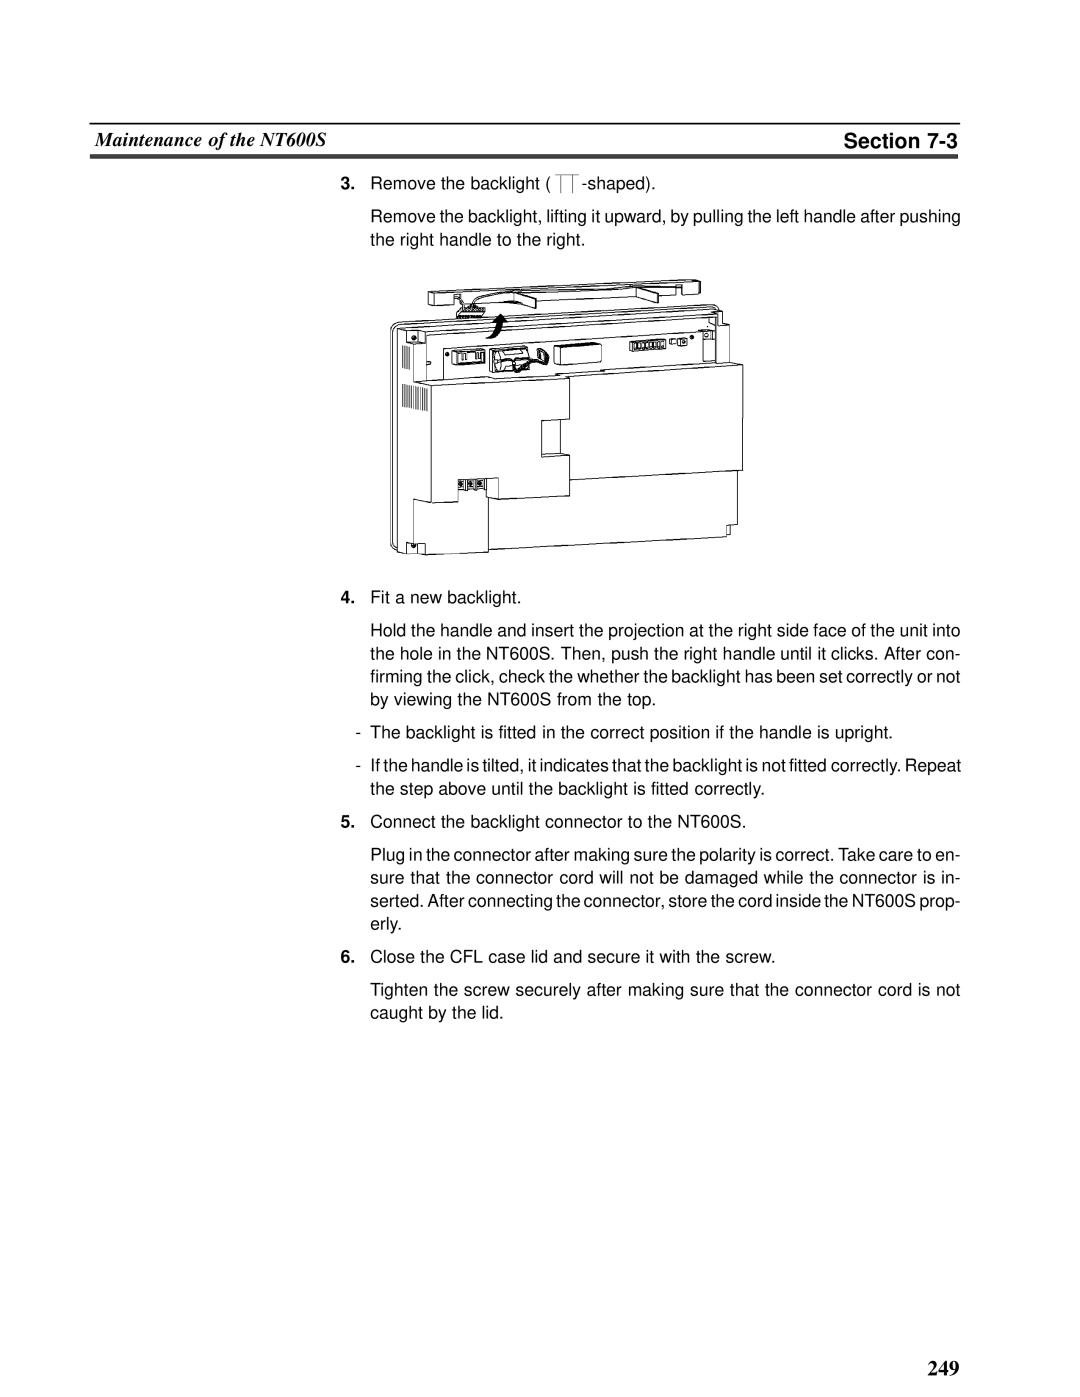 Omron V022-E3-1 operation manual Section, Remove the backlight 